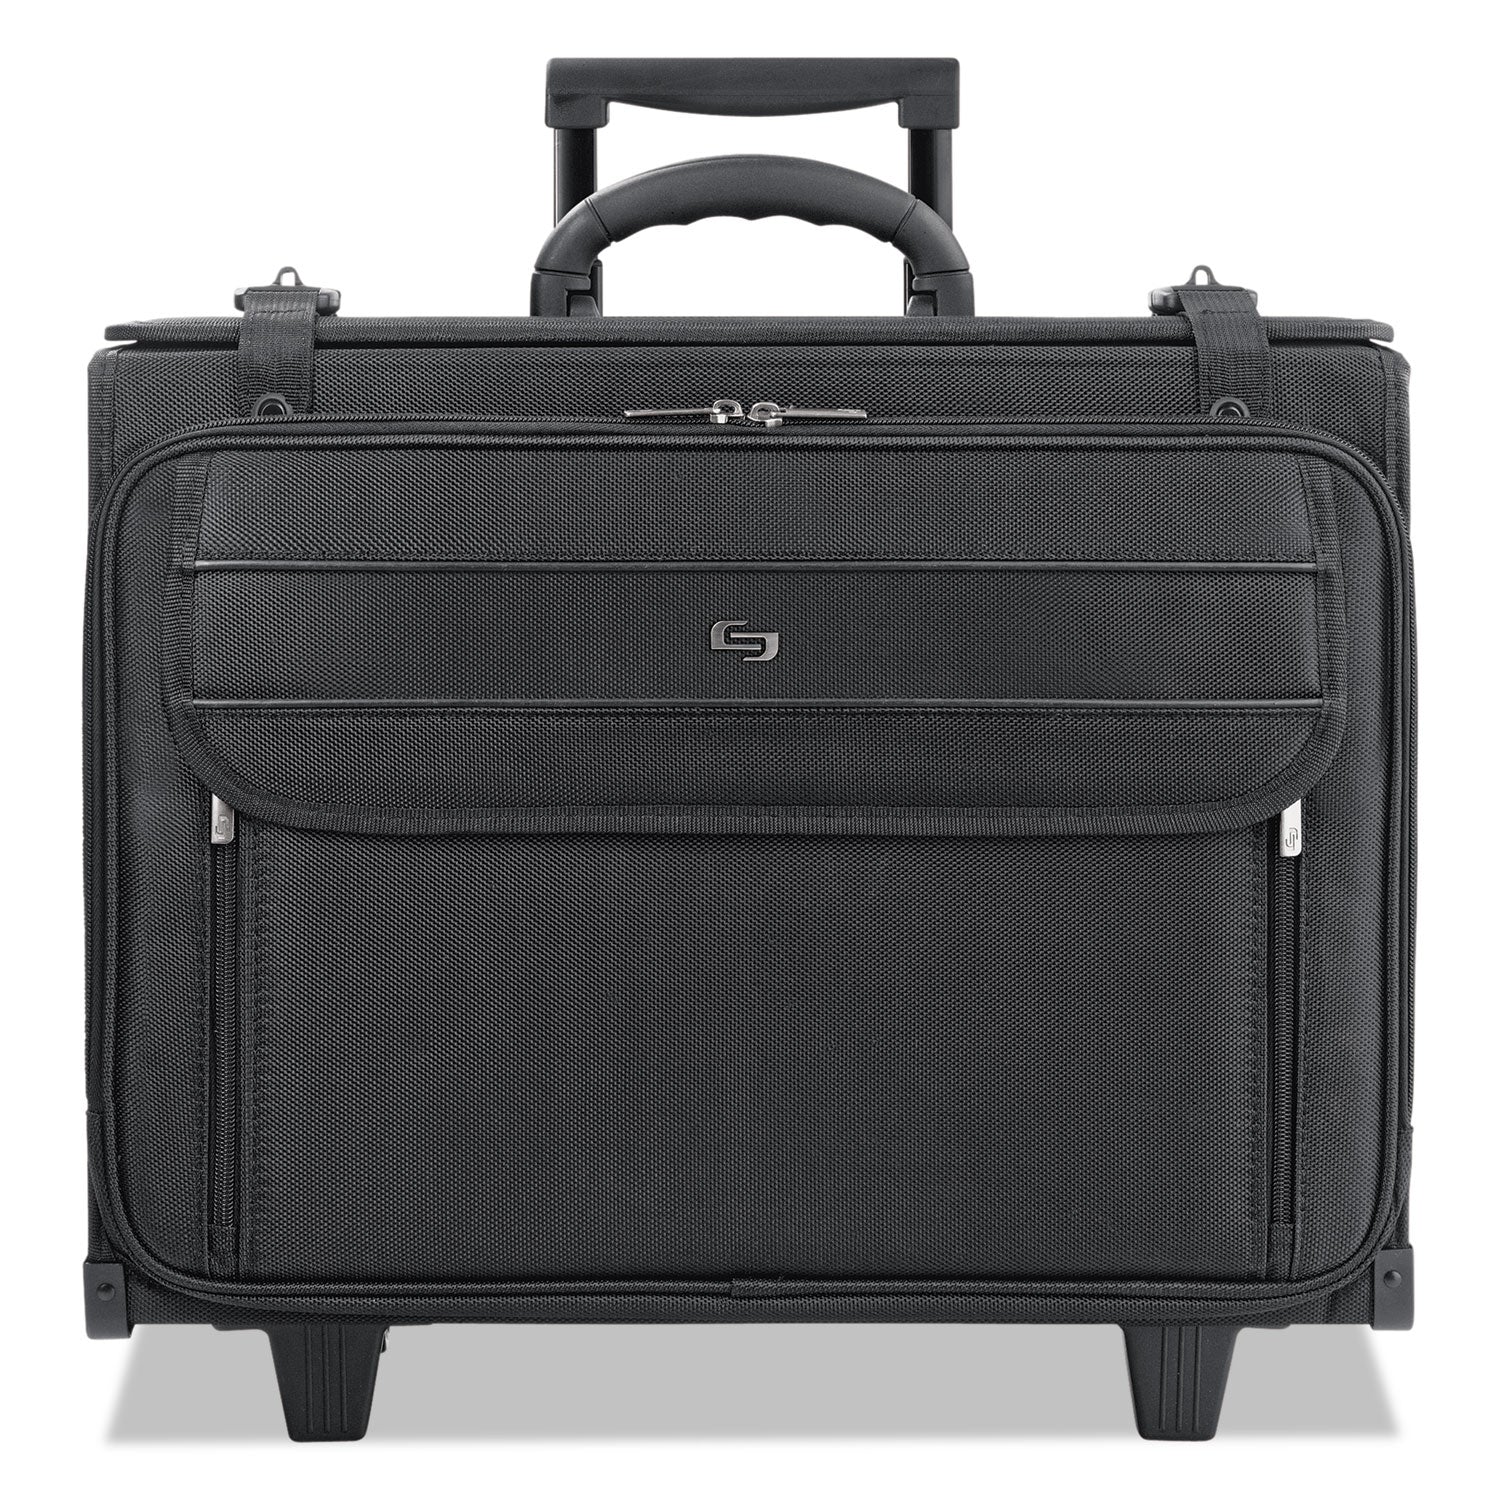 Classic Rolling Catalog Case, Fits Devices Up to 17.3", Polyester, 18 x 7 x 14, Black - 